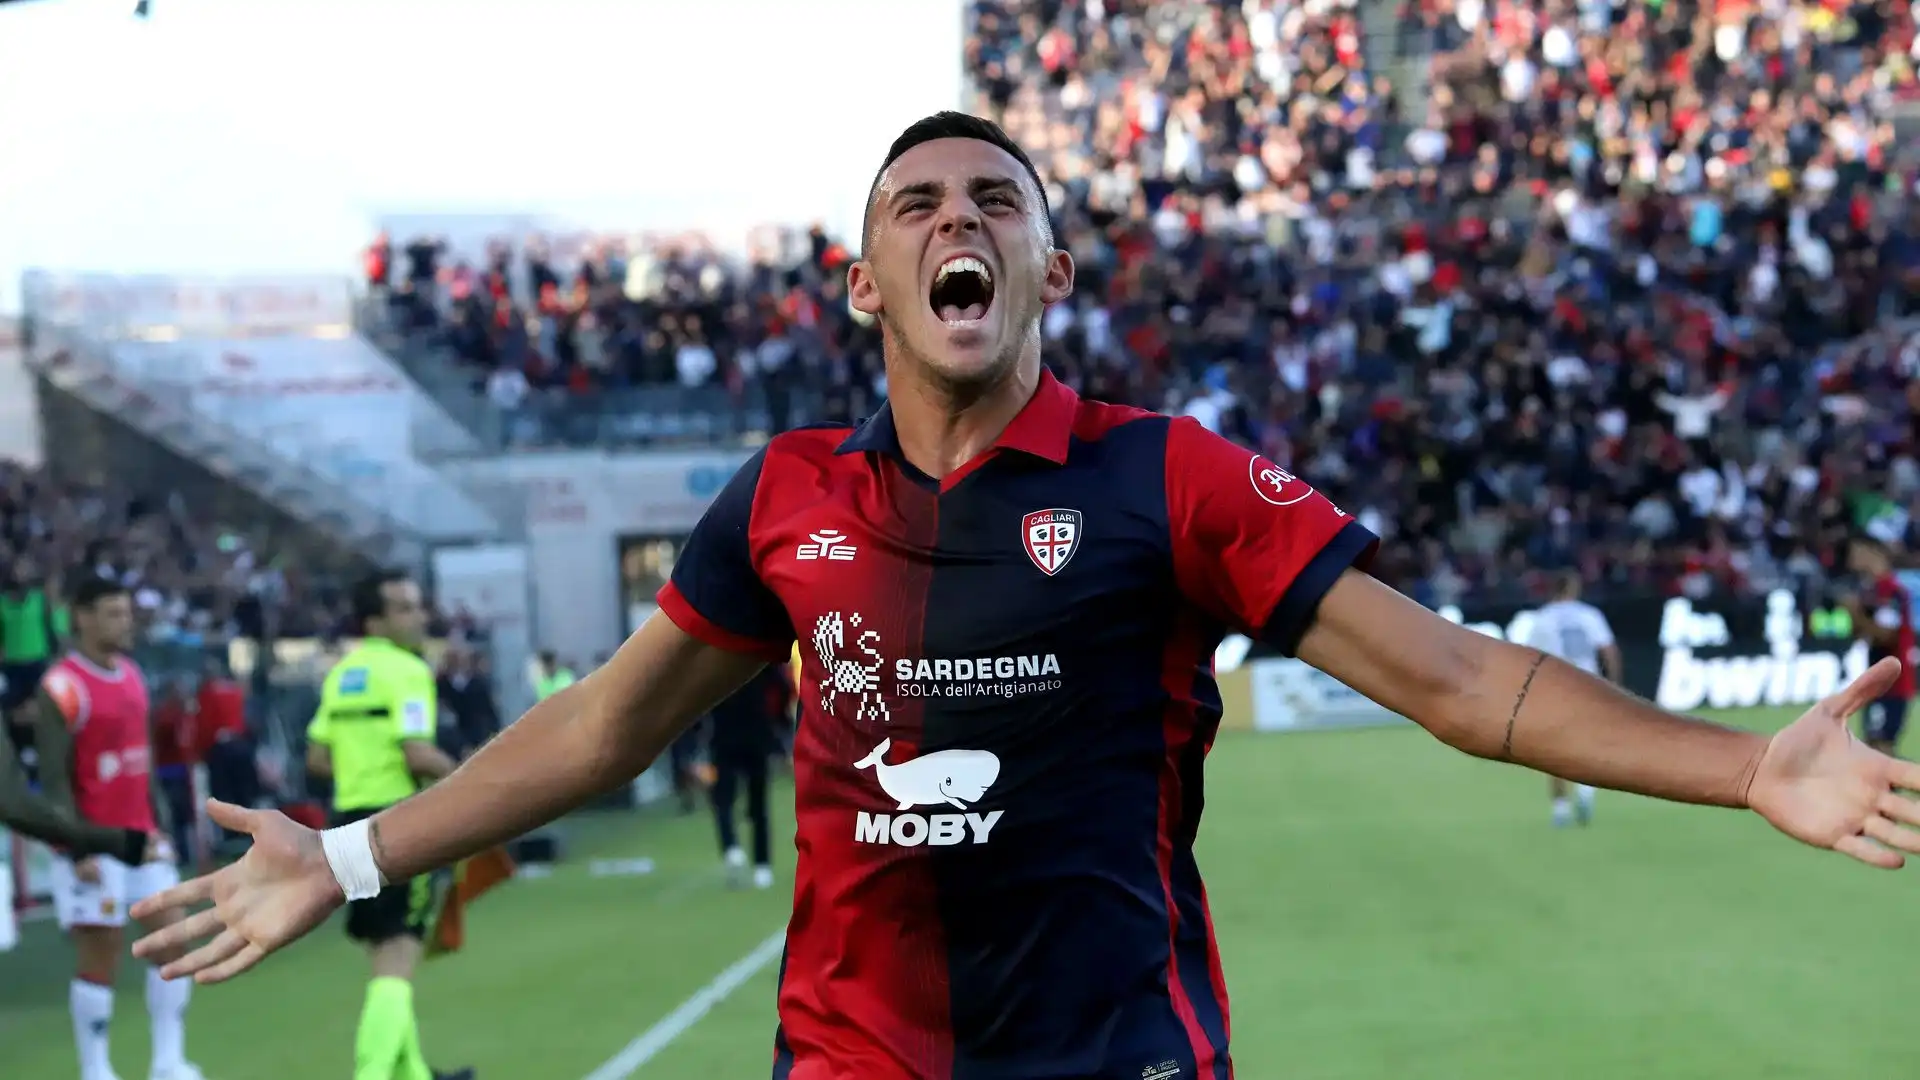 Cagliari are on a positive note for the first time this season, as substitute Zappa gifted their third successive victory across all competitions.